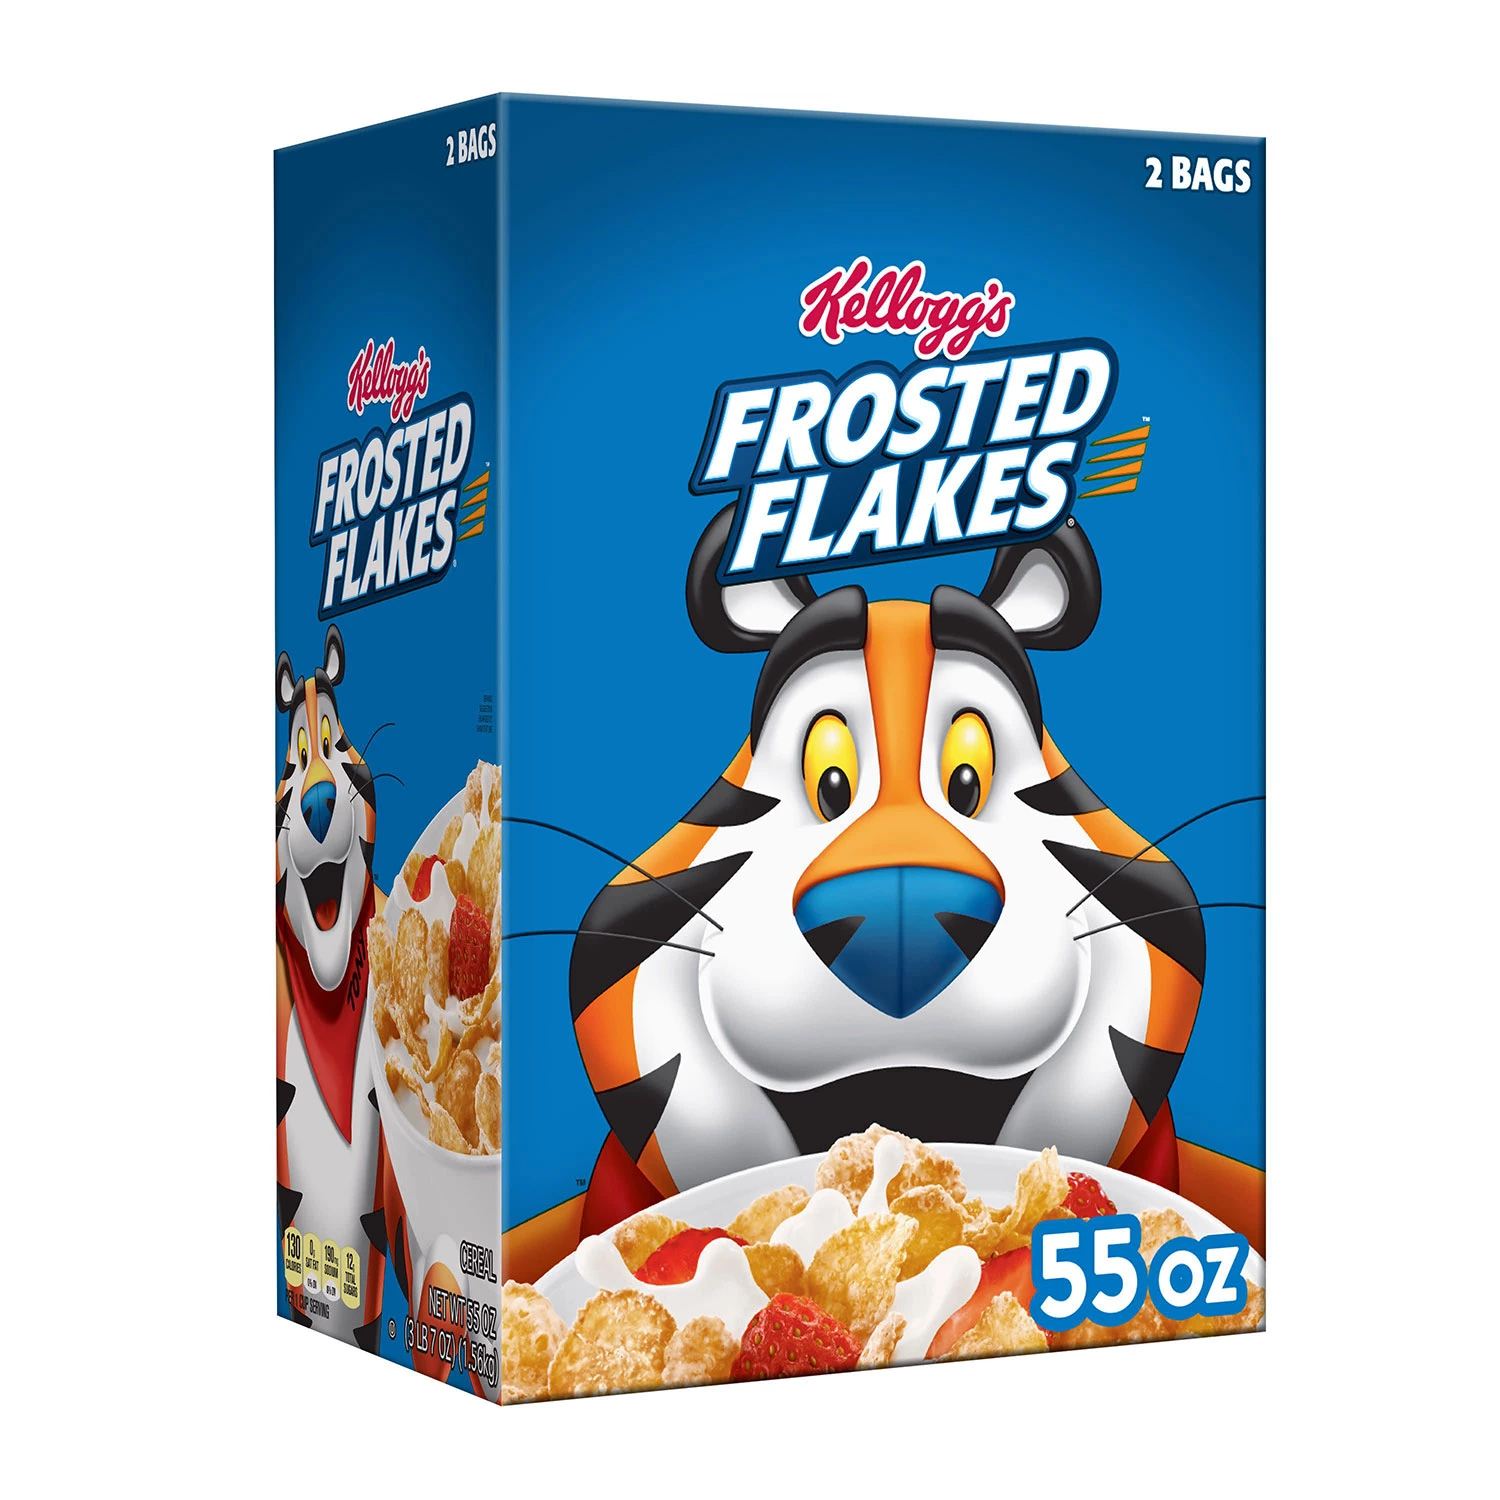 Kellogg’s Frosted Flakes Cereal (55 oz.)